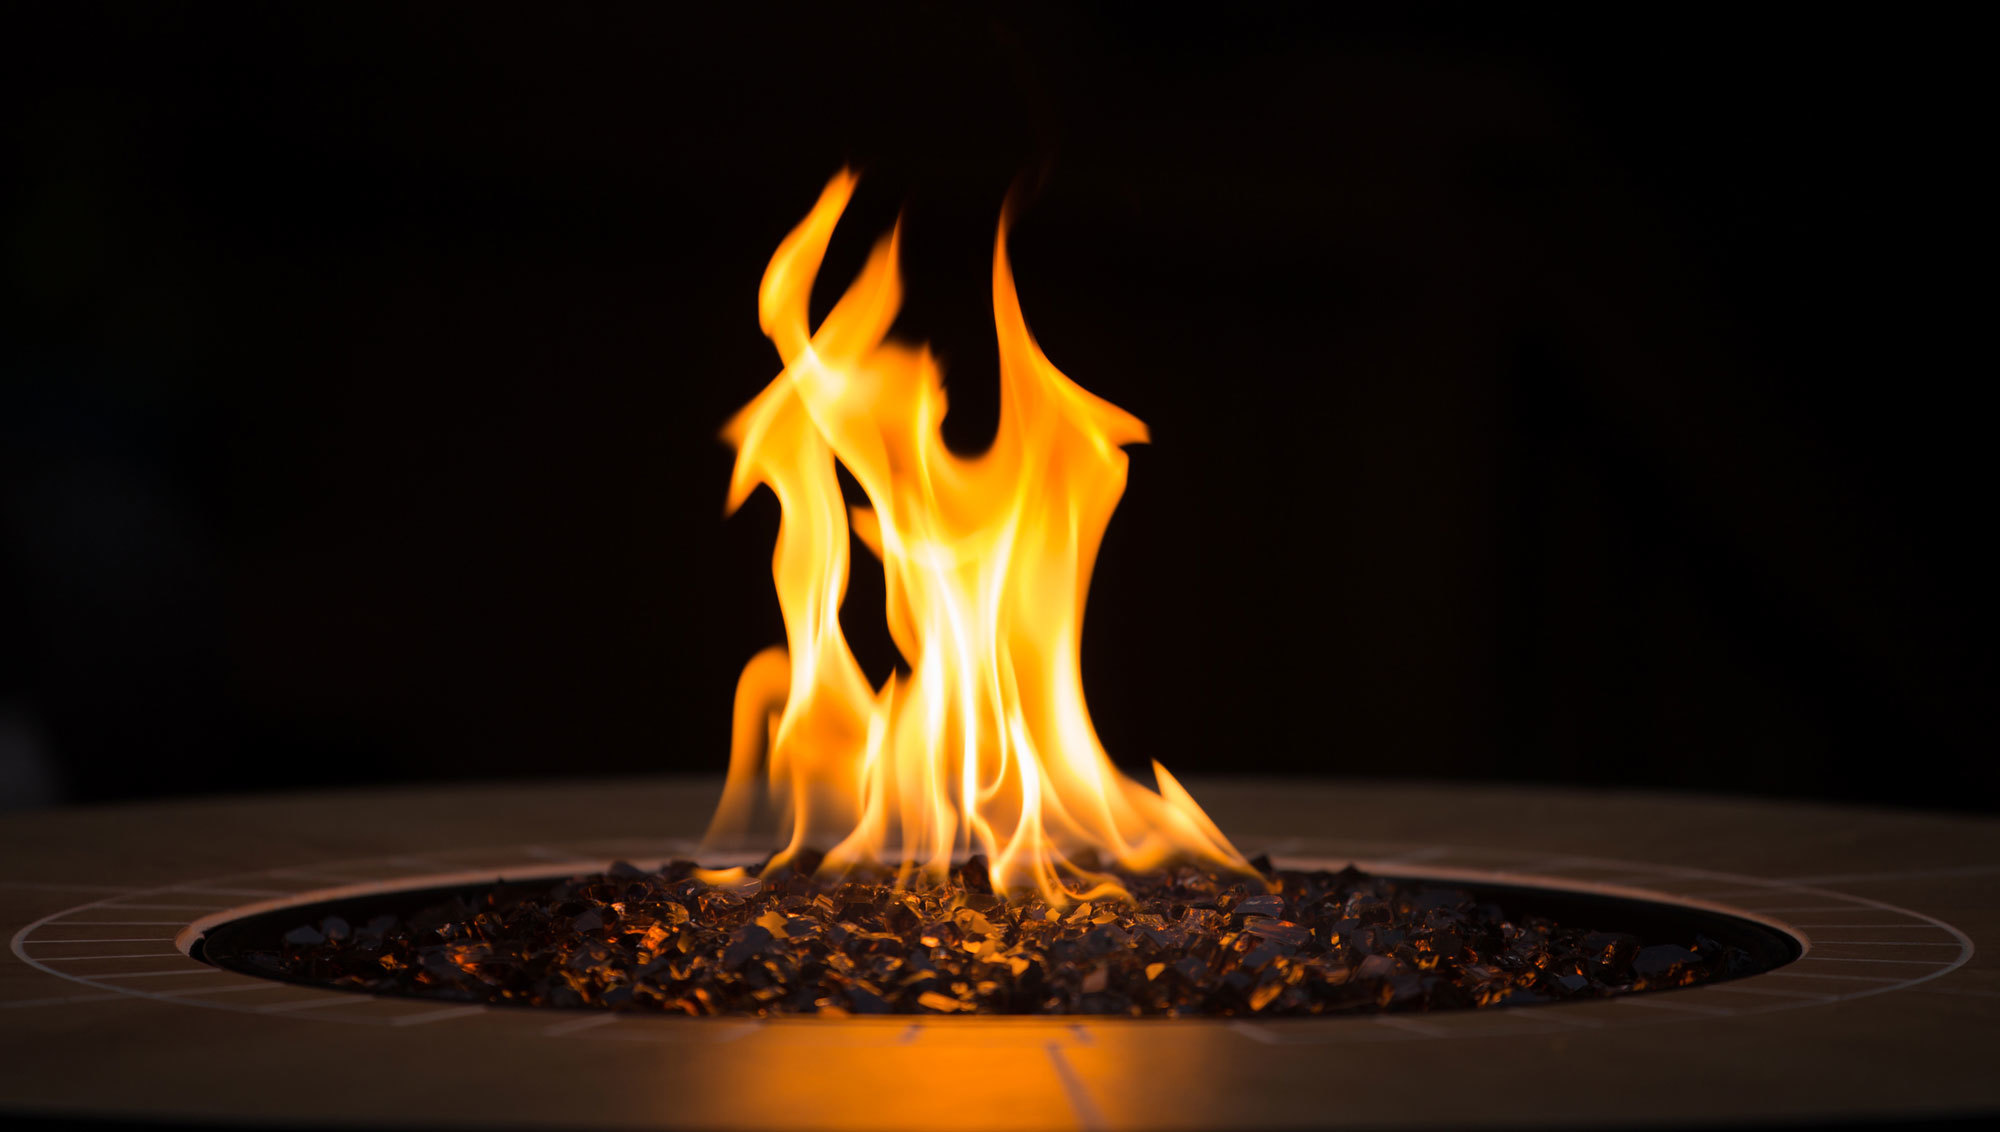 Lit fire pit with flame